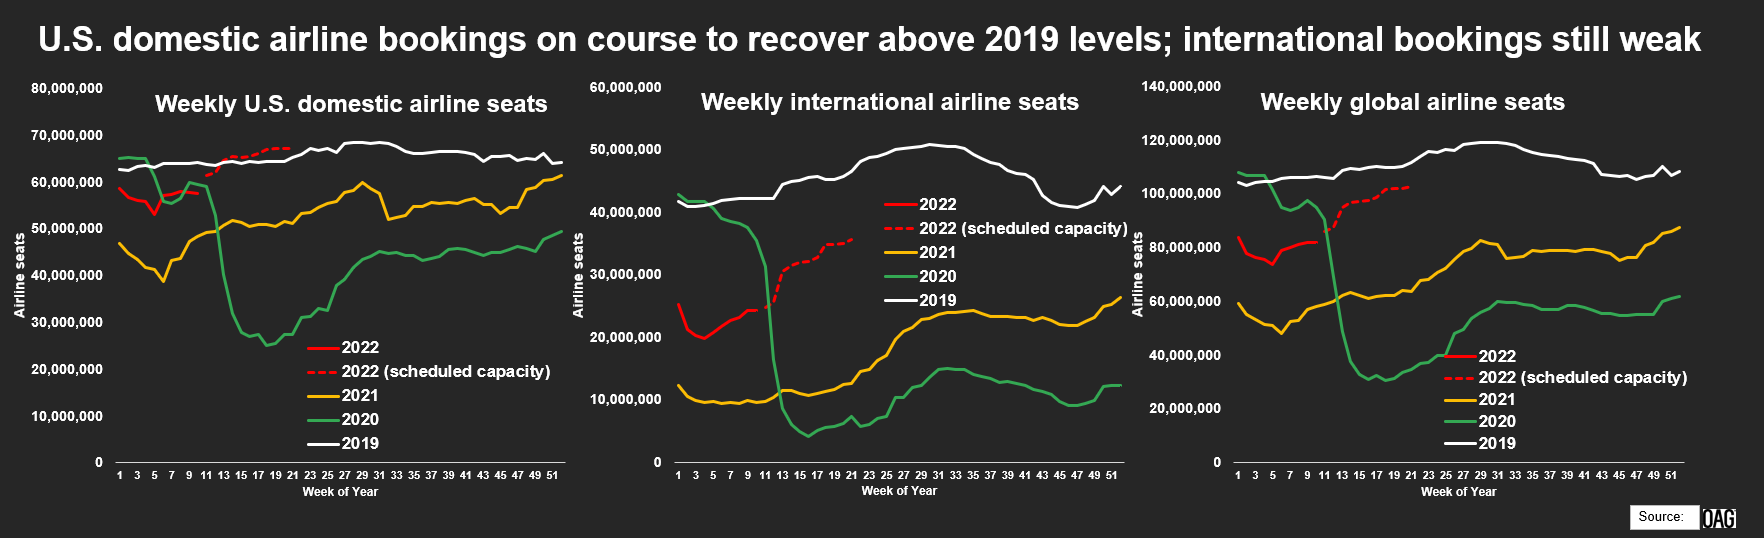 U.S. domestic airline bookings on course to recover above 2019 levels; international bookings still weak